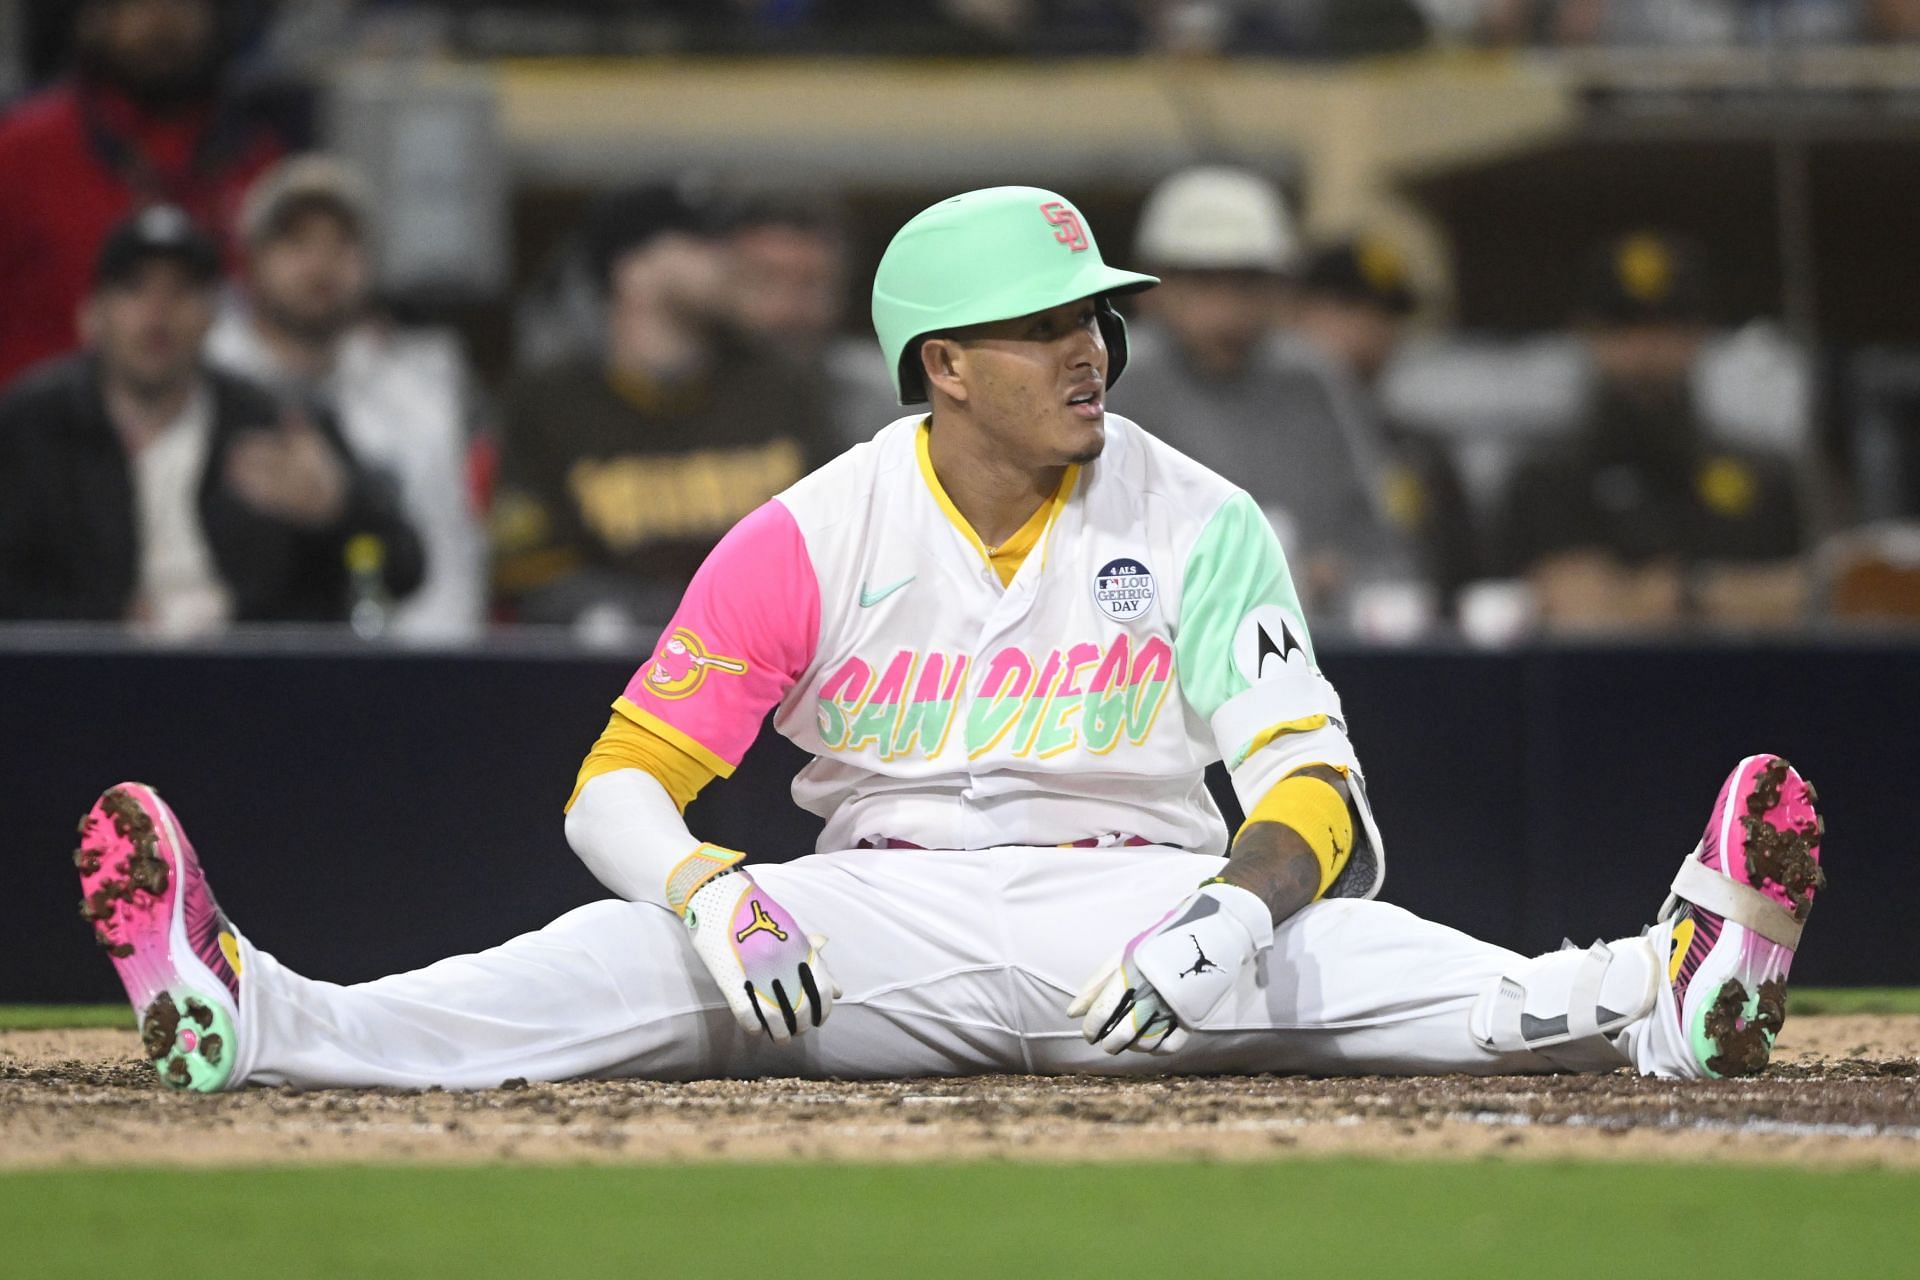 Manny Machado of the San Diego Padres sits on the ground after being brushed back by a pitch at Petco Park